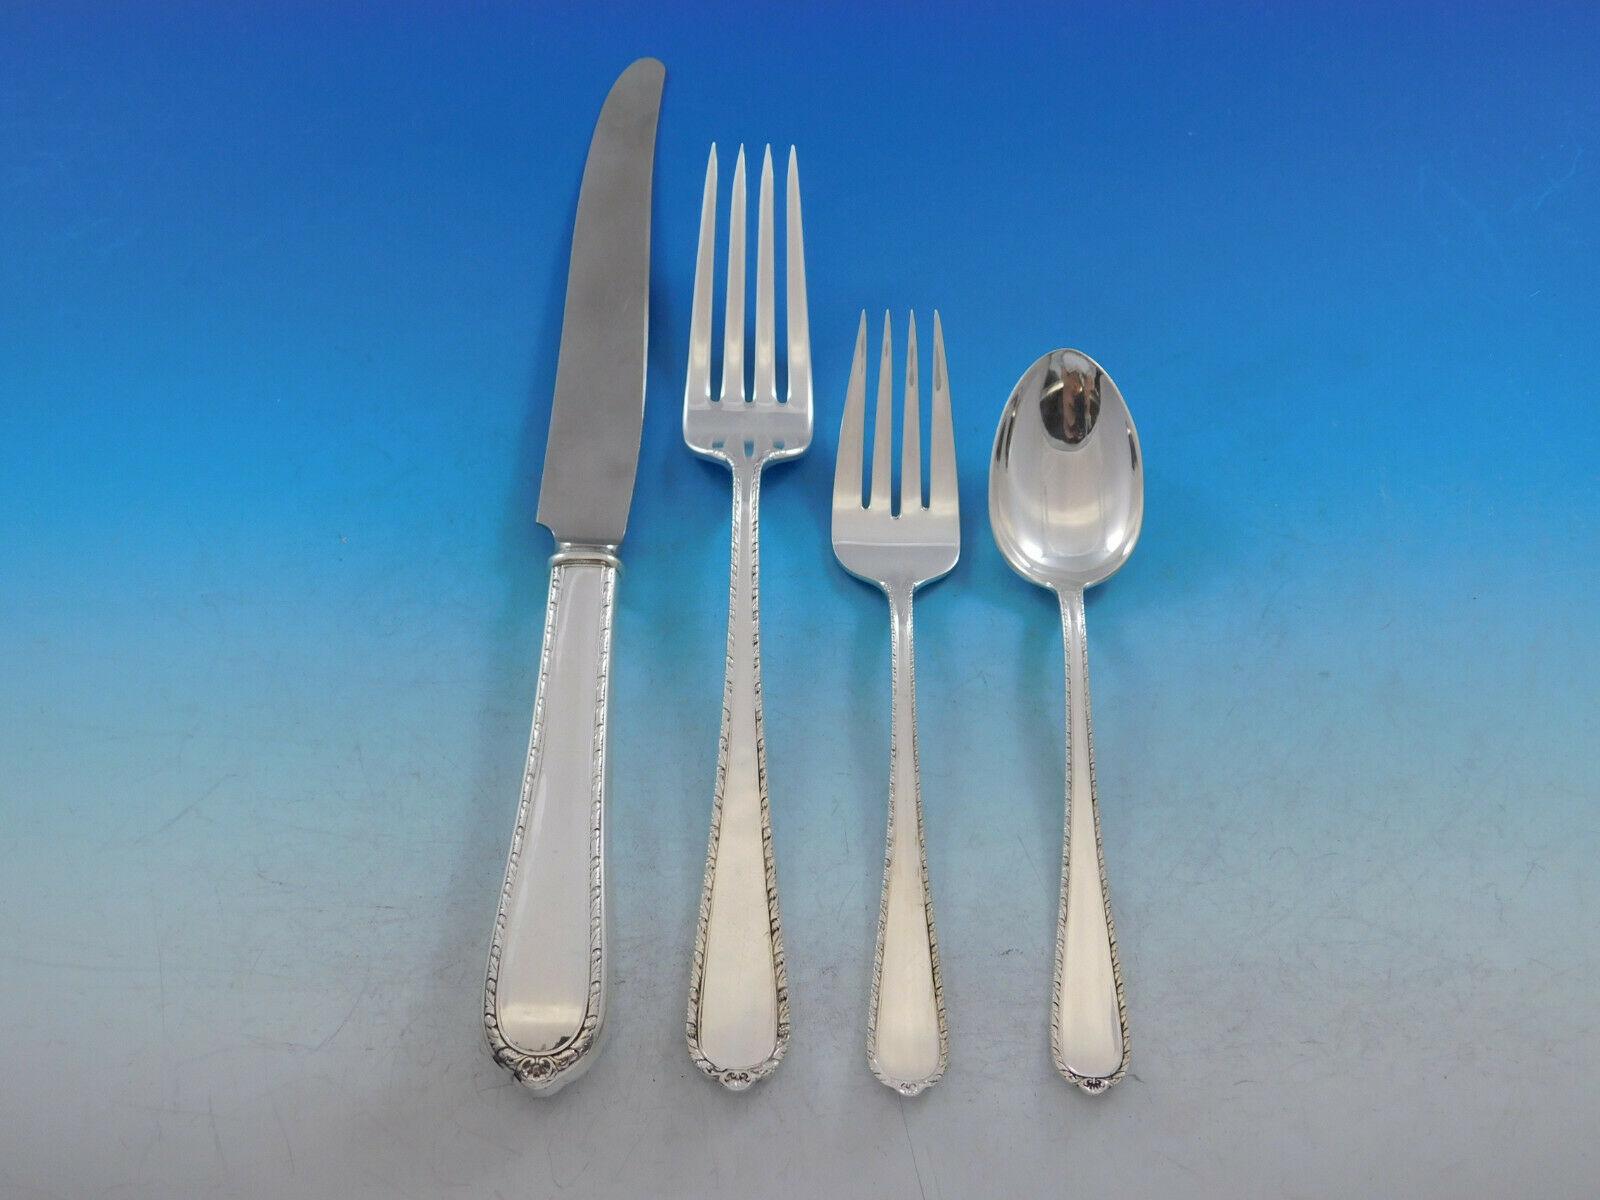 Monumental pine tree by international sterling silver flatware set, 169 pieces. This set includes:

12 dinner size knives, 9 5/8